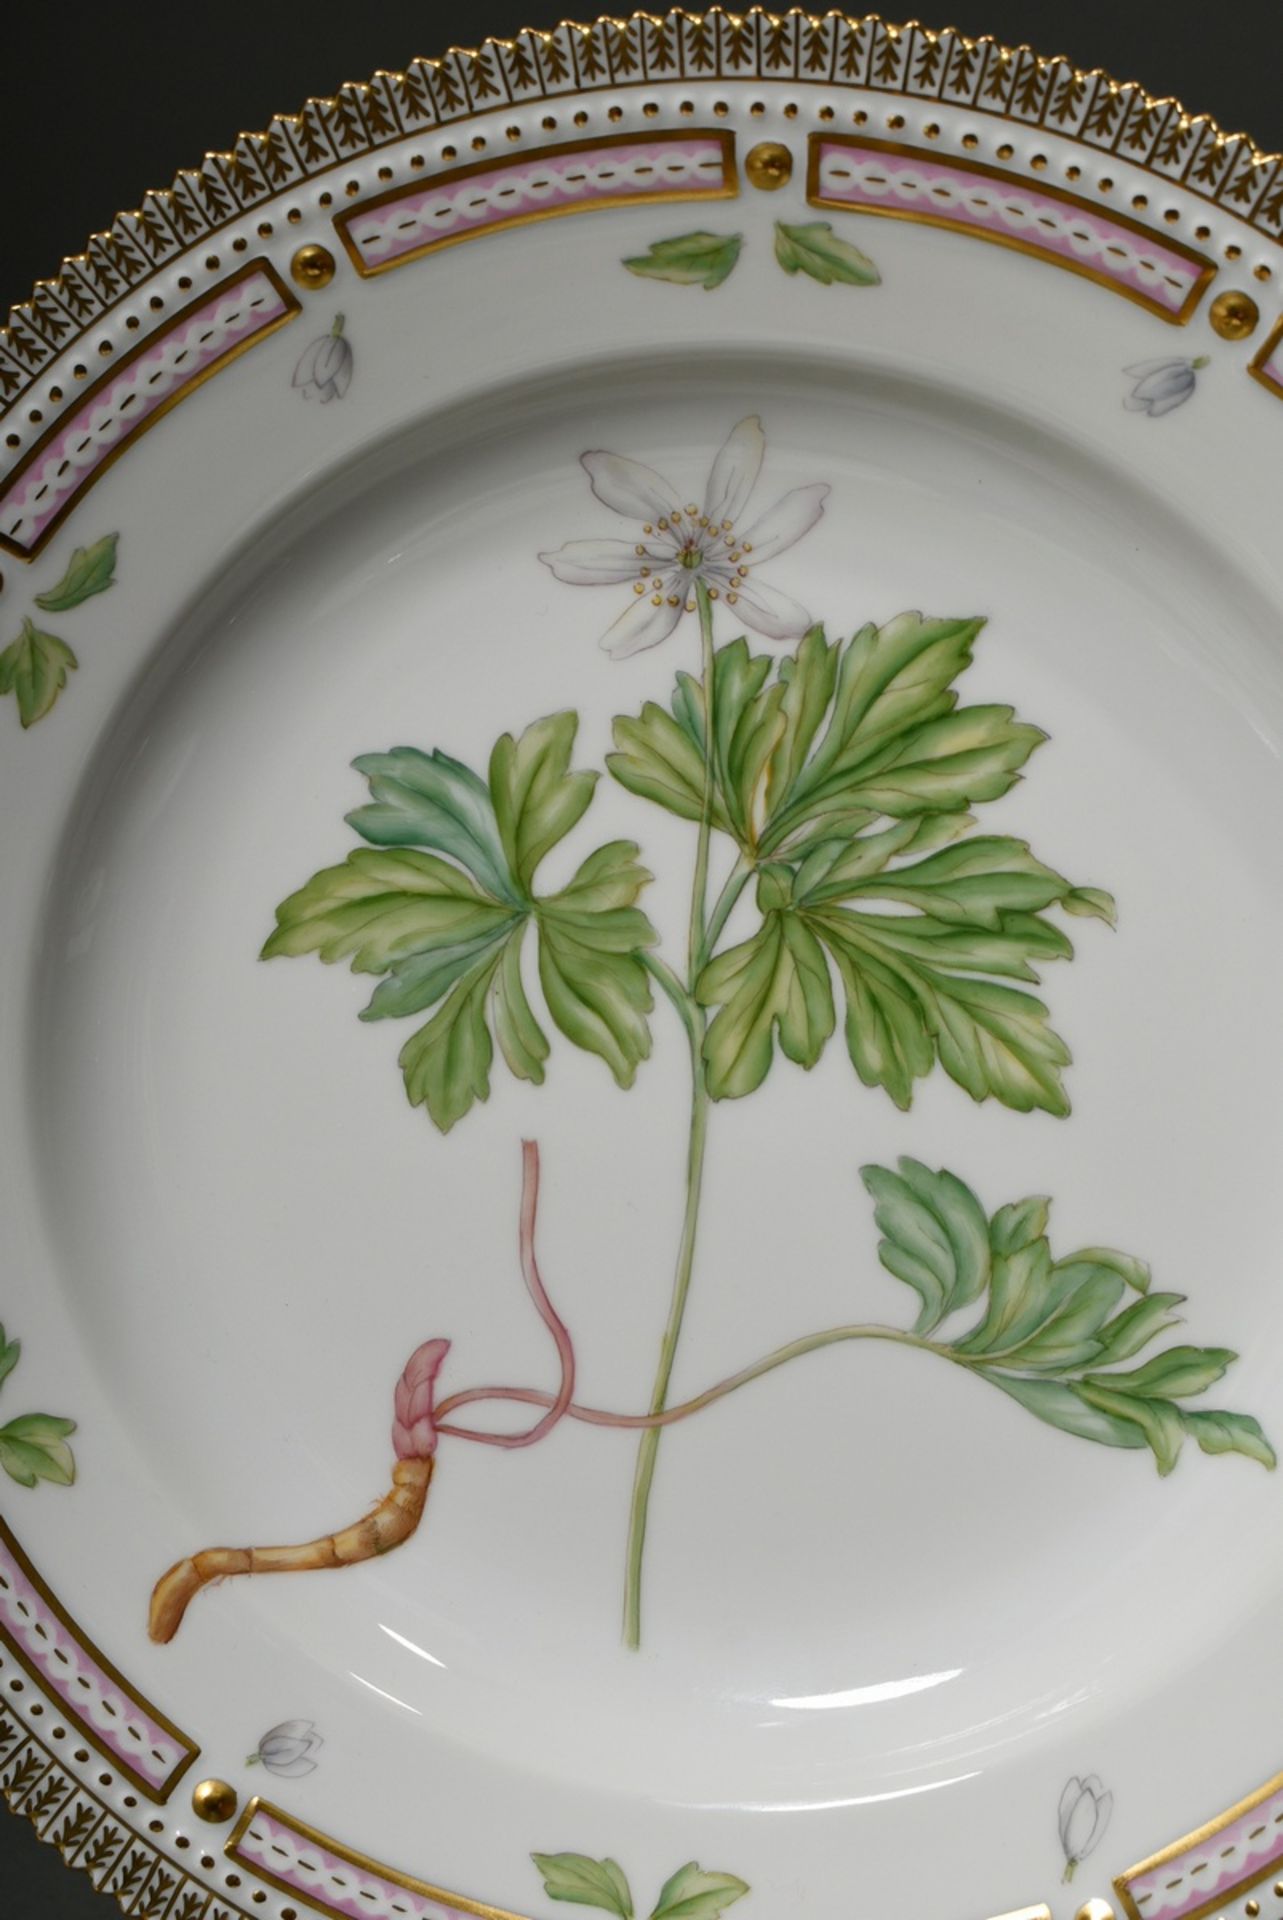 6 Royal Copenhagen "Flora Danica" dinner plates with polychrome painting in the mirror and gold dec - Image 9 of 15